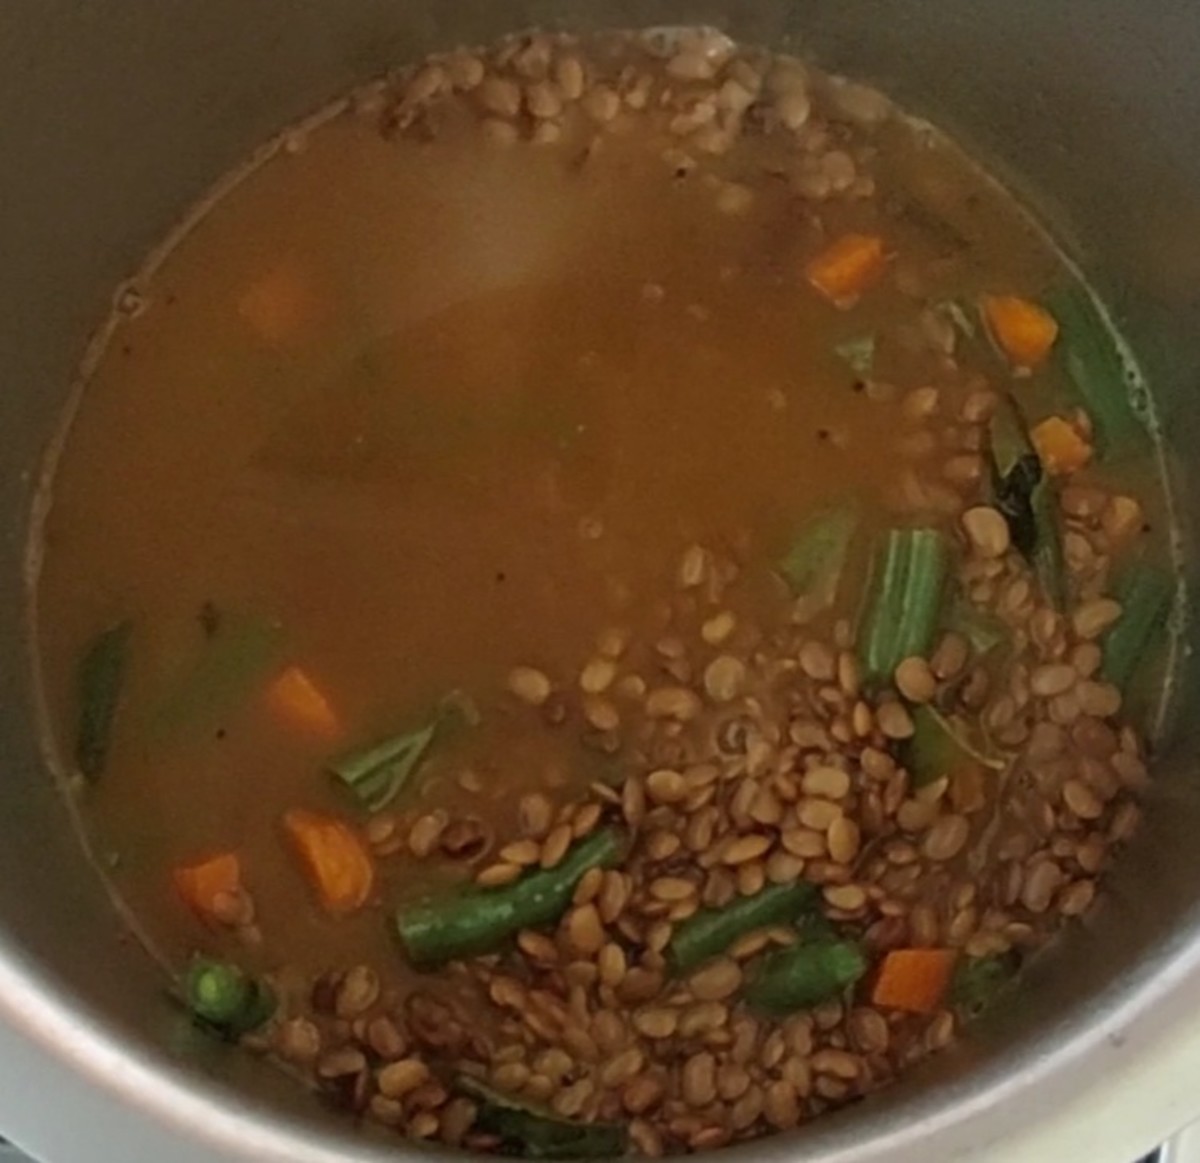 Once the vegetables are cooked, add cooked horse gram to the vegetables.